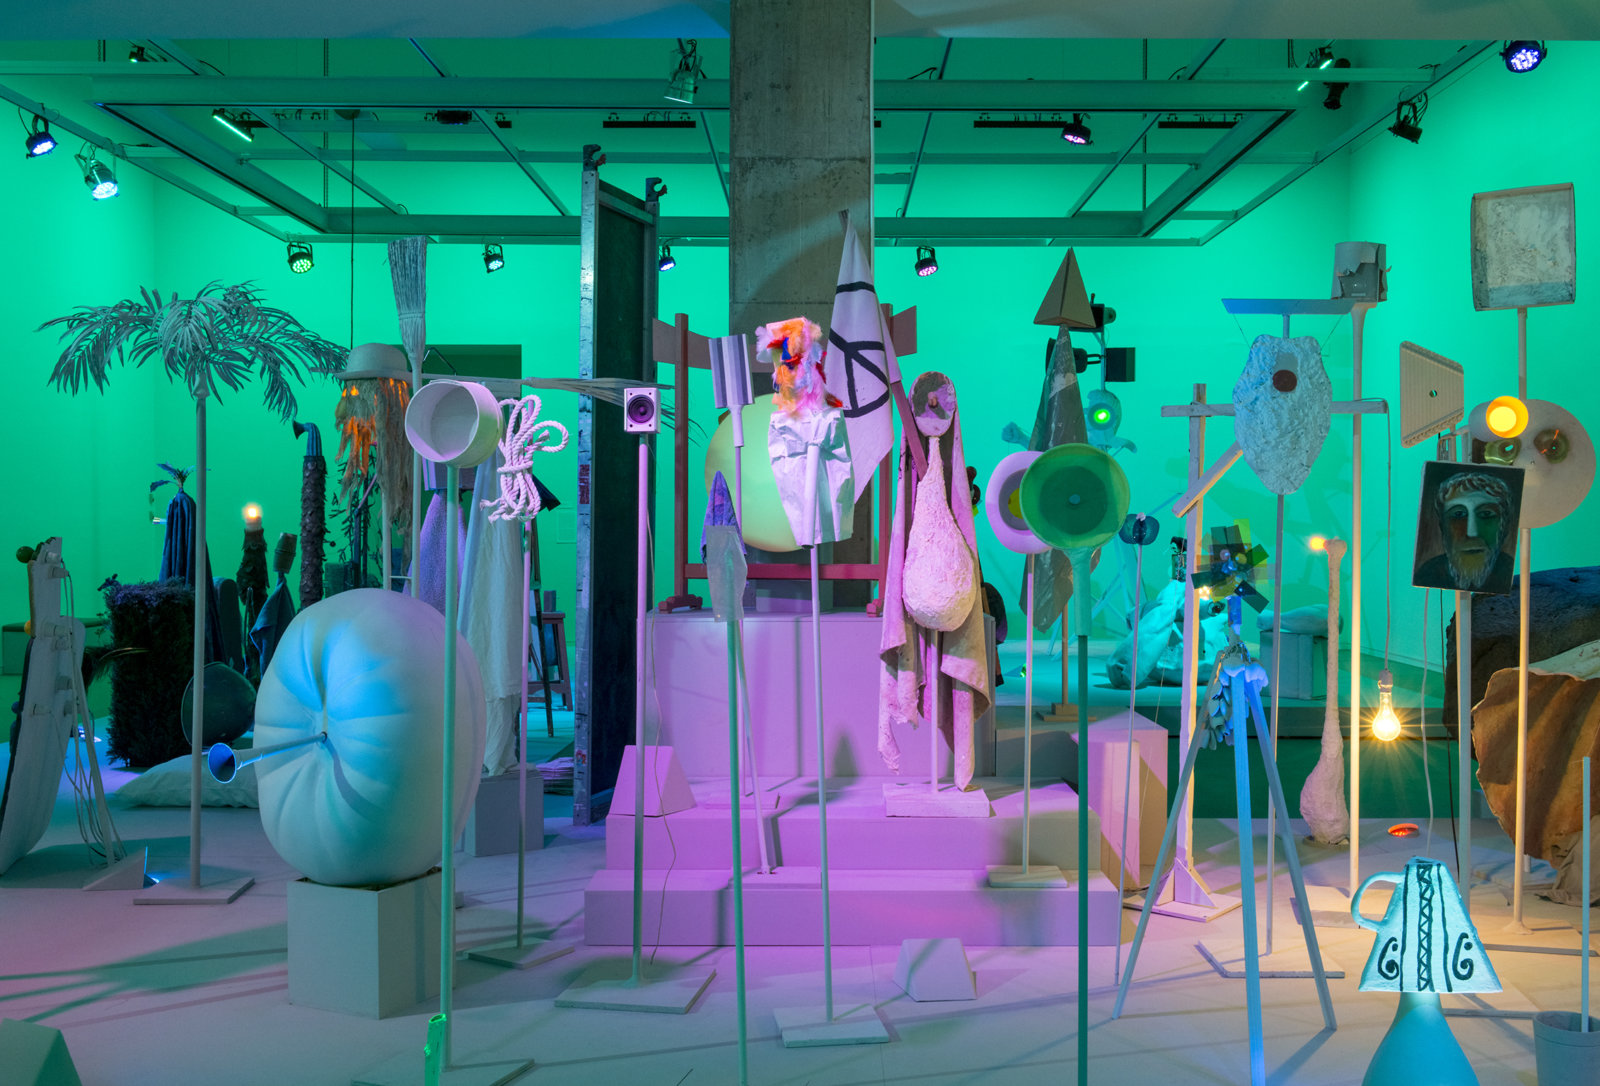 Geoffrey Farmer, Let's Make The Water Turn Black, 2013, a theatrical presentation of sculptural objects on a stage, with animatronics, audio and lighting directed by various computer programs, 289 x 360 x 90 in. (734 x 914 x 229 cm). Installation view, How Do I Fit This Ghost in My Mouth?, Vancouver Art Gallery, 2015